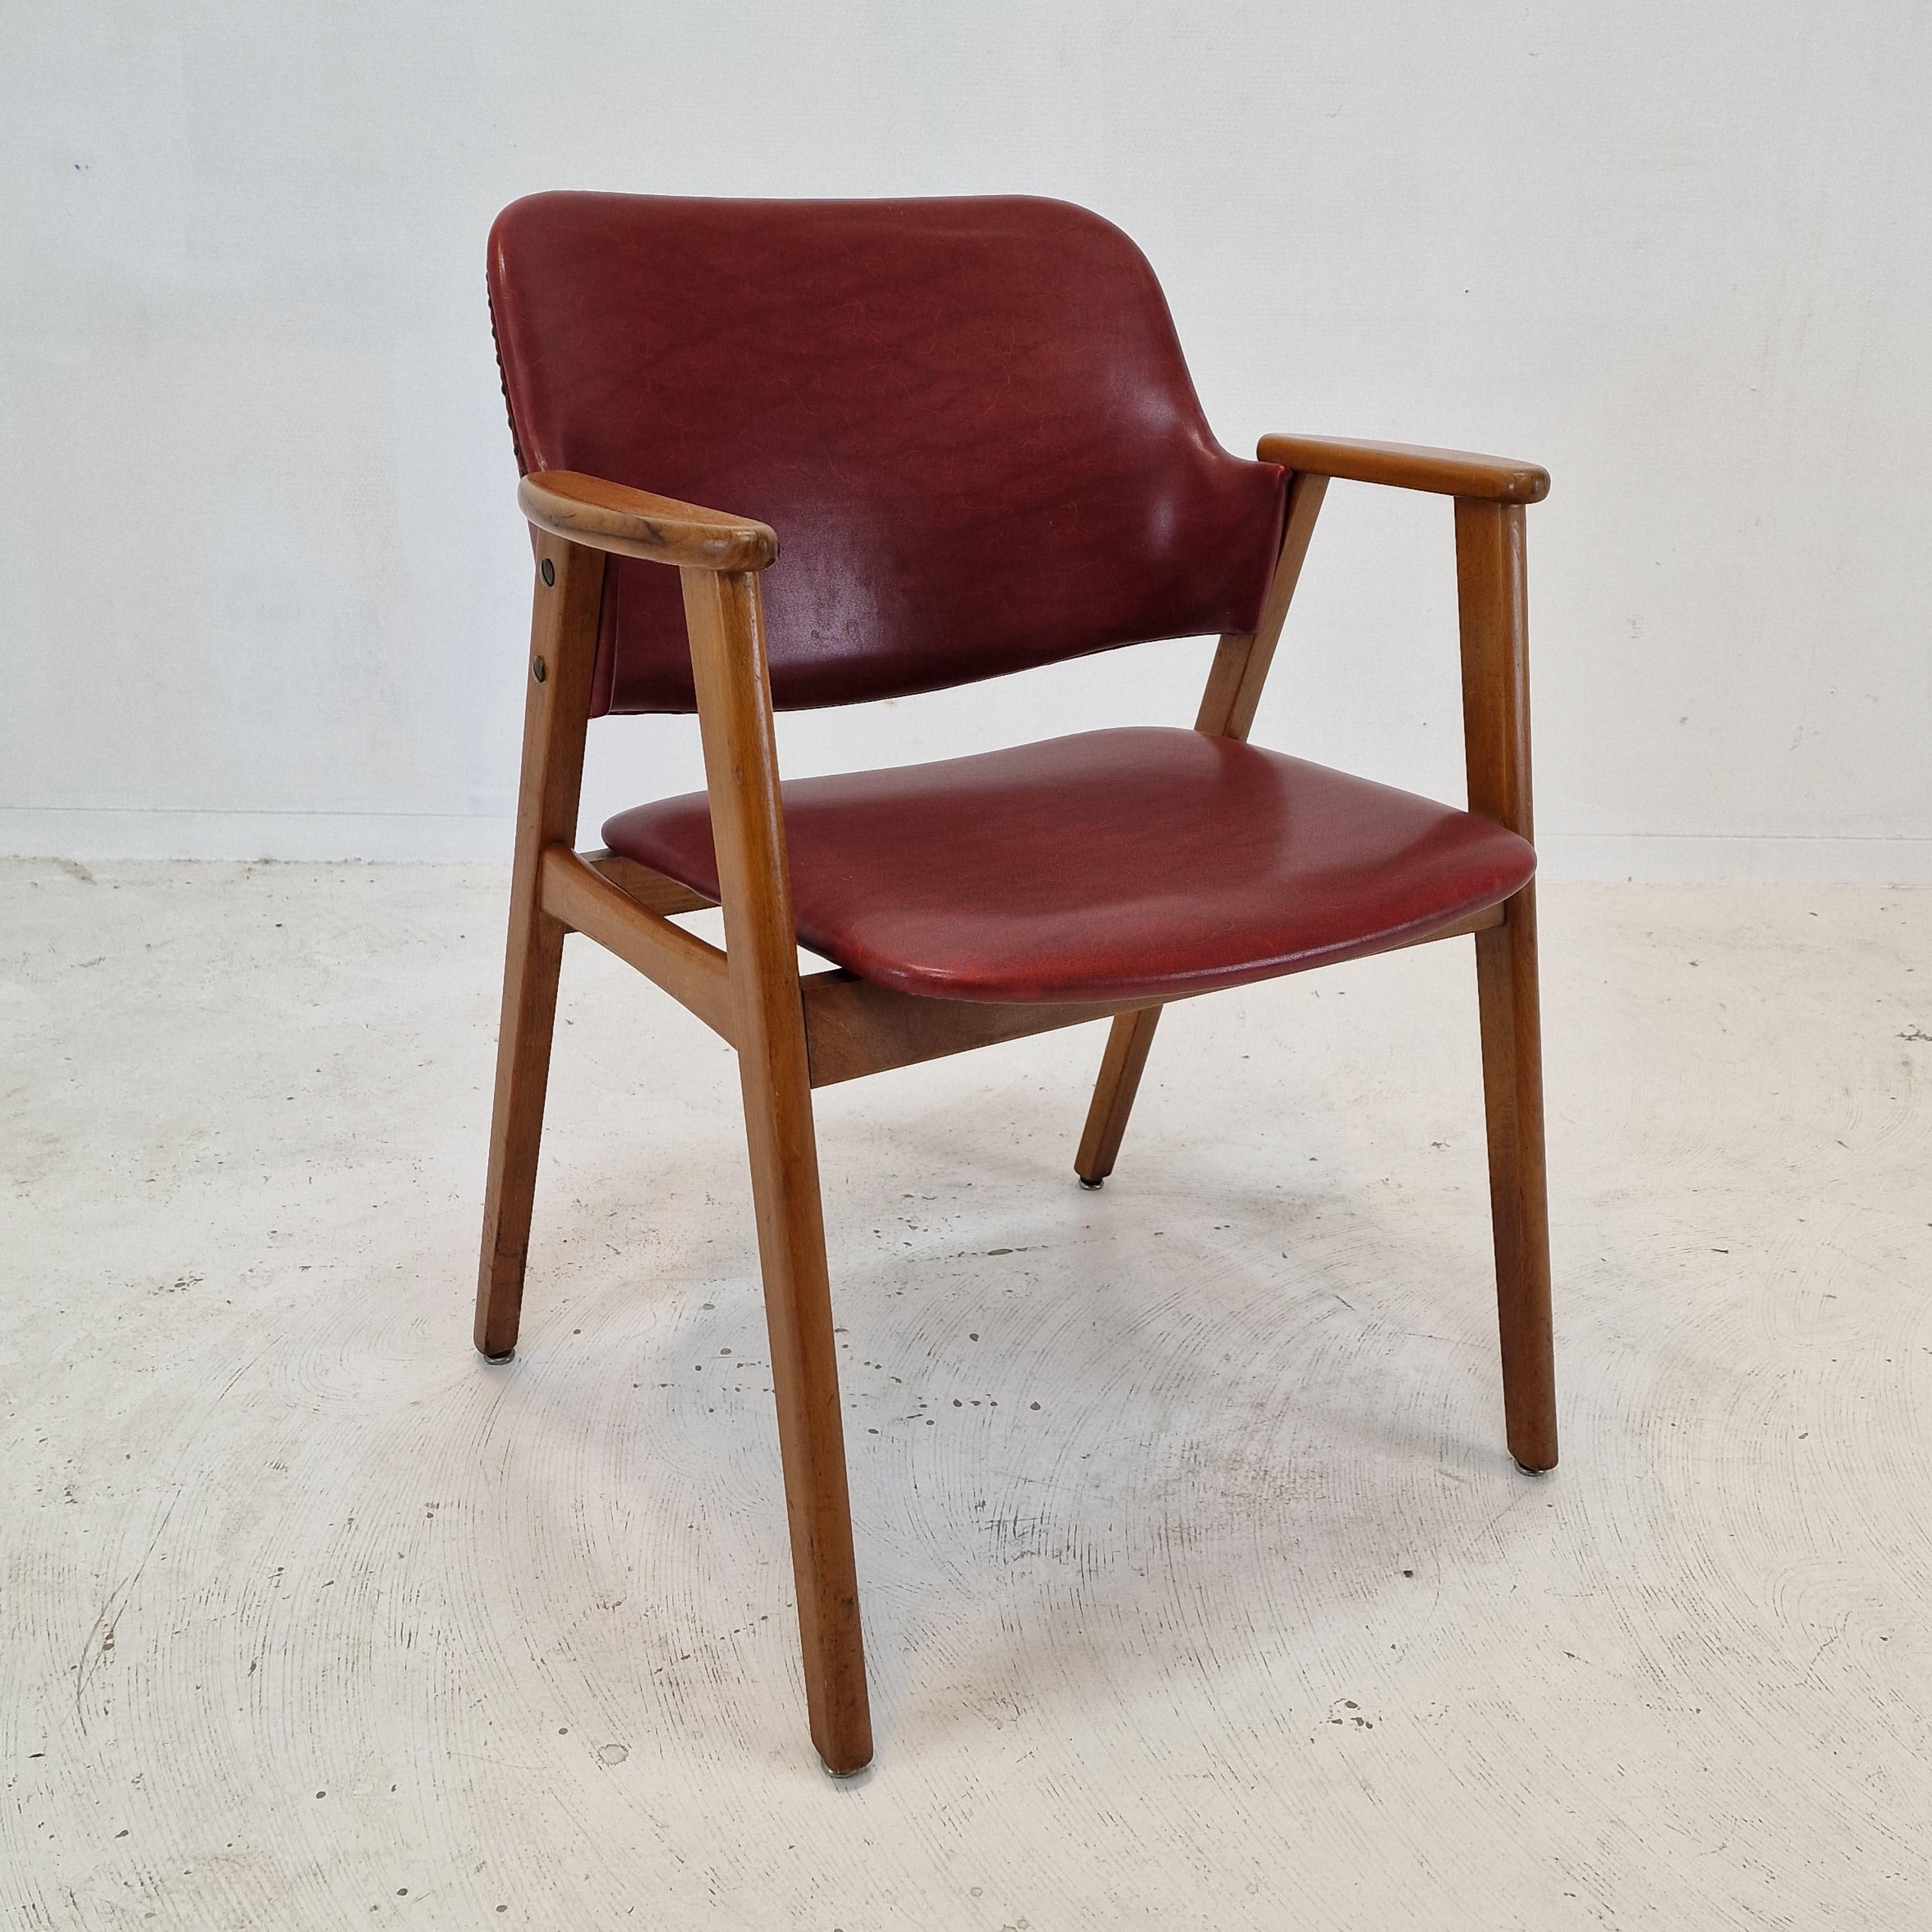 Midcentury Dining or Restaurant Chairs by Cees Braakman for Pastoe, 1950s In Good Condition For Sale In Oud Beijerland, NL